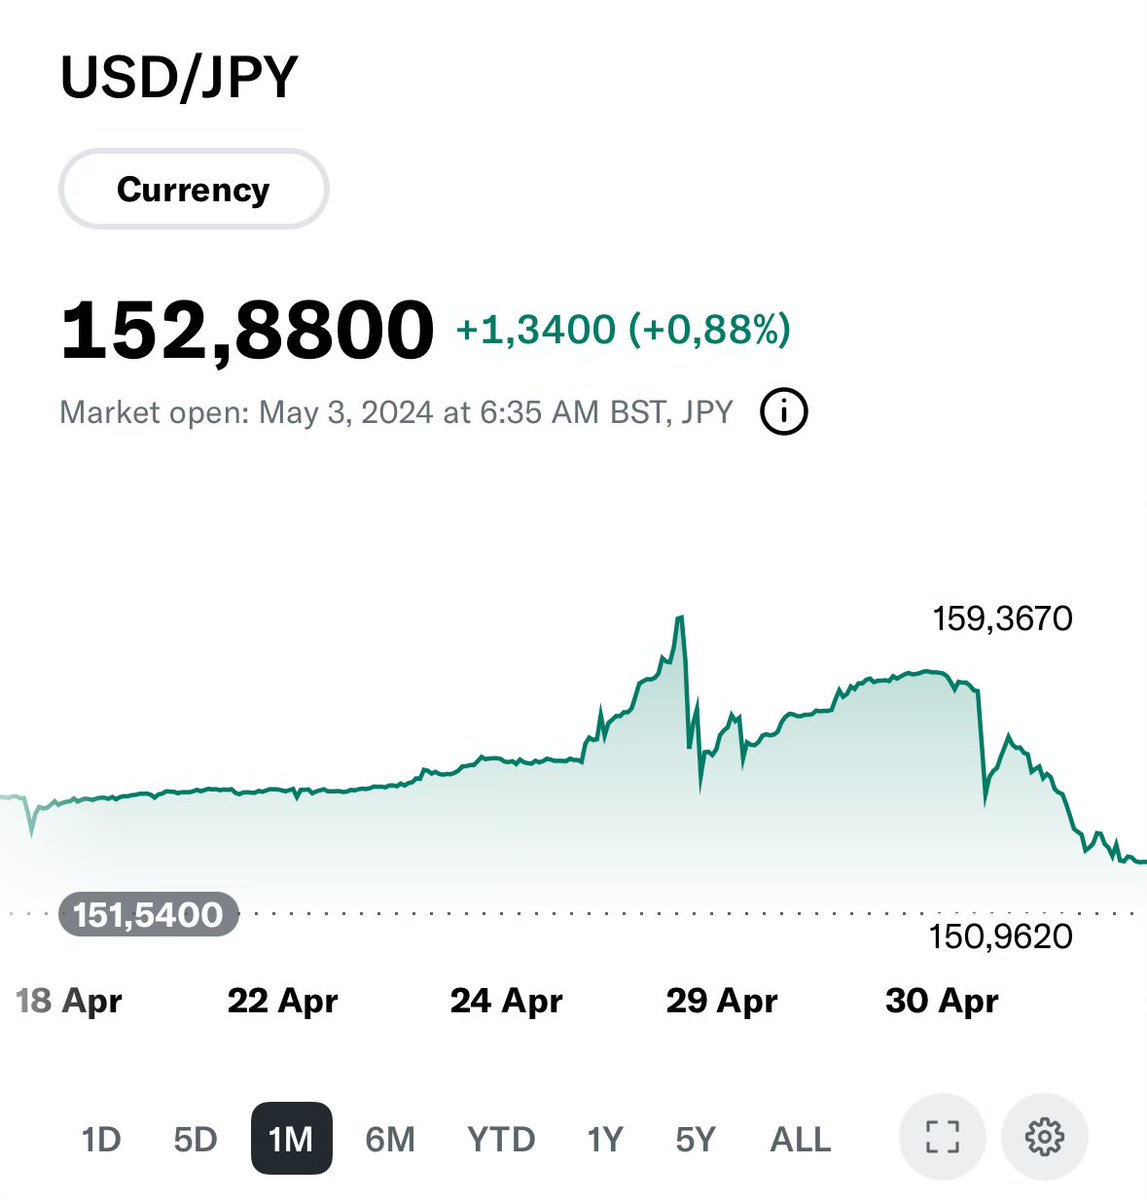 The Bank of Japan’s renewed #Yen intervention killed some short sellers. But for how long? - Japan’s total #debt-to-GDP ratio is near 450% - As a result, Japan’s 10-year bond #yield remains below 1% after the biggest global monetary tightening cycle in decades. - Japan’s…